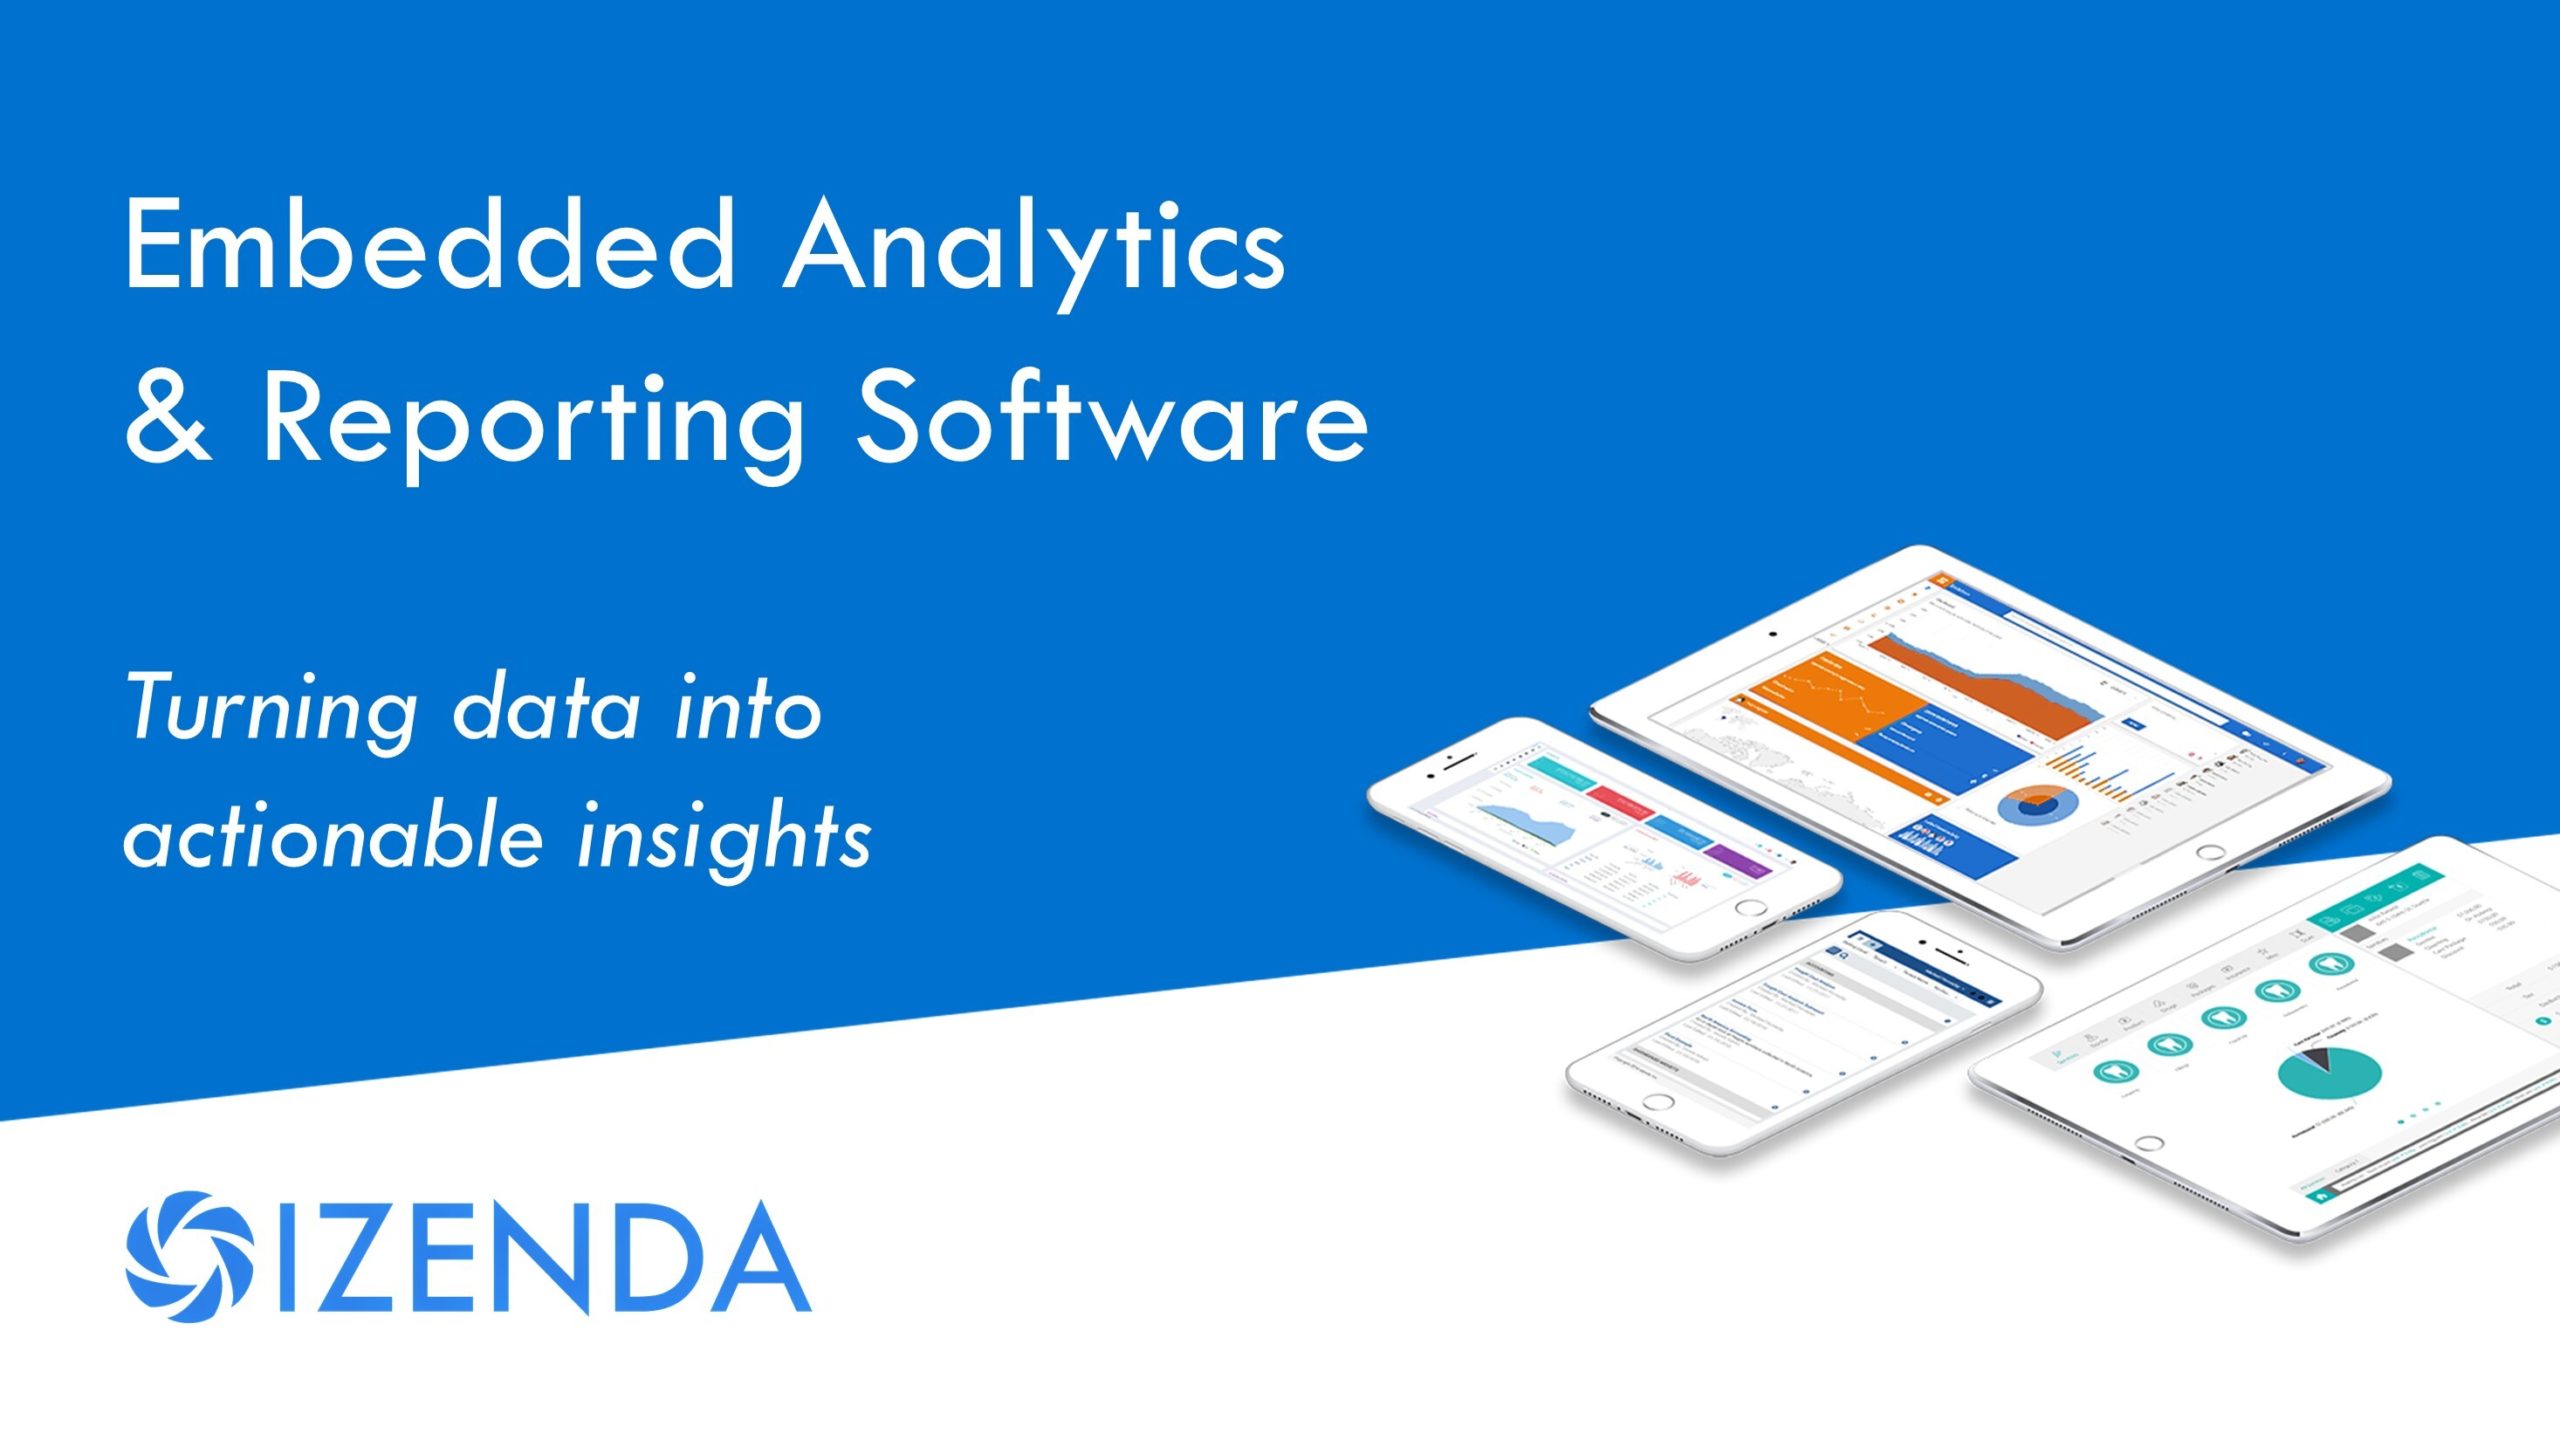 embedded analytics and reporting software from izenda